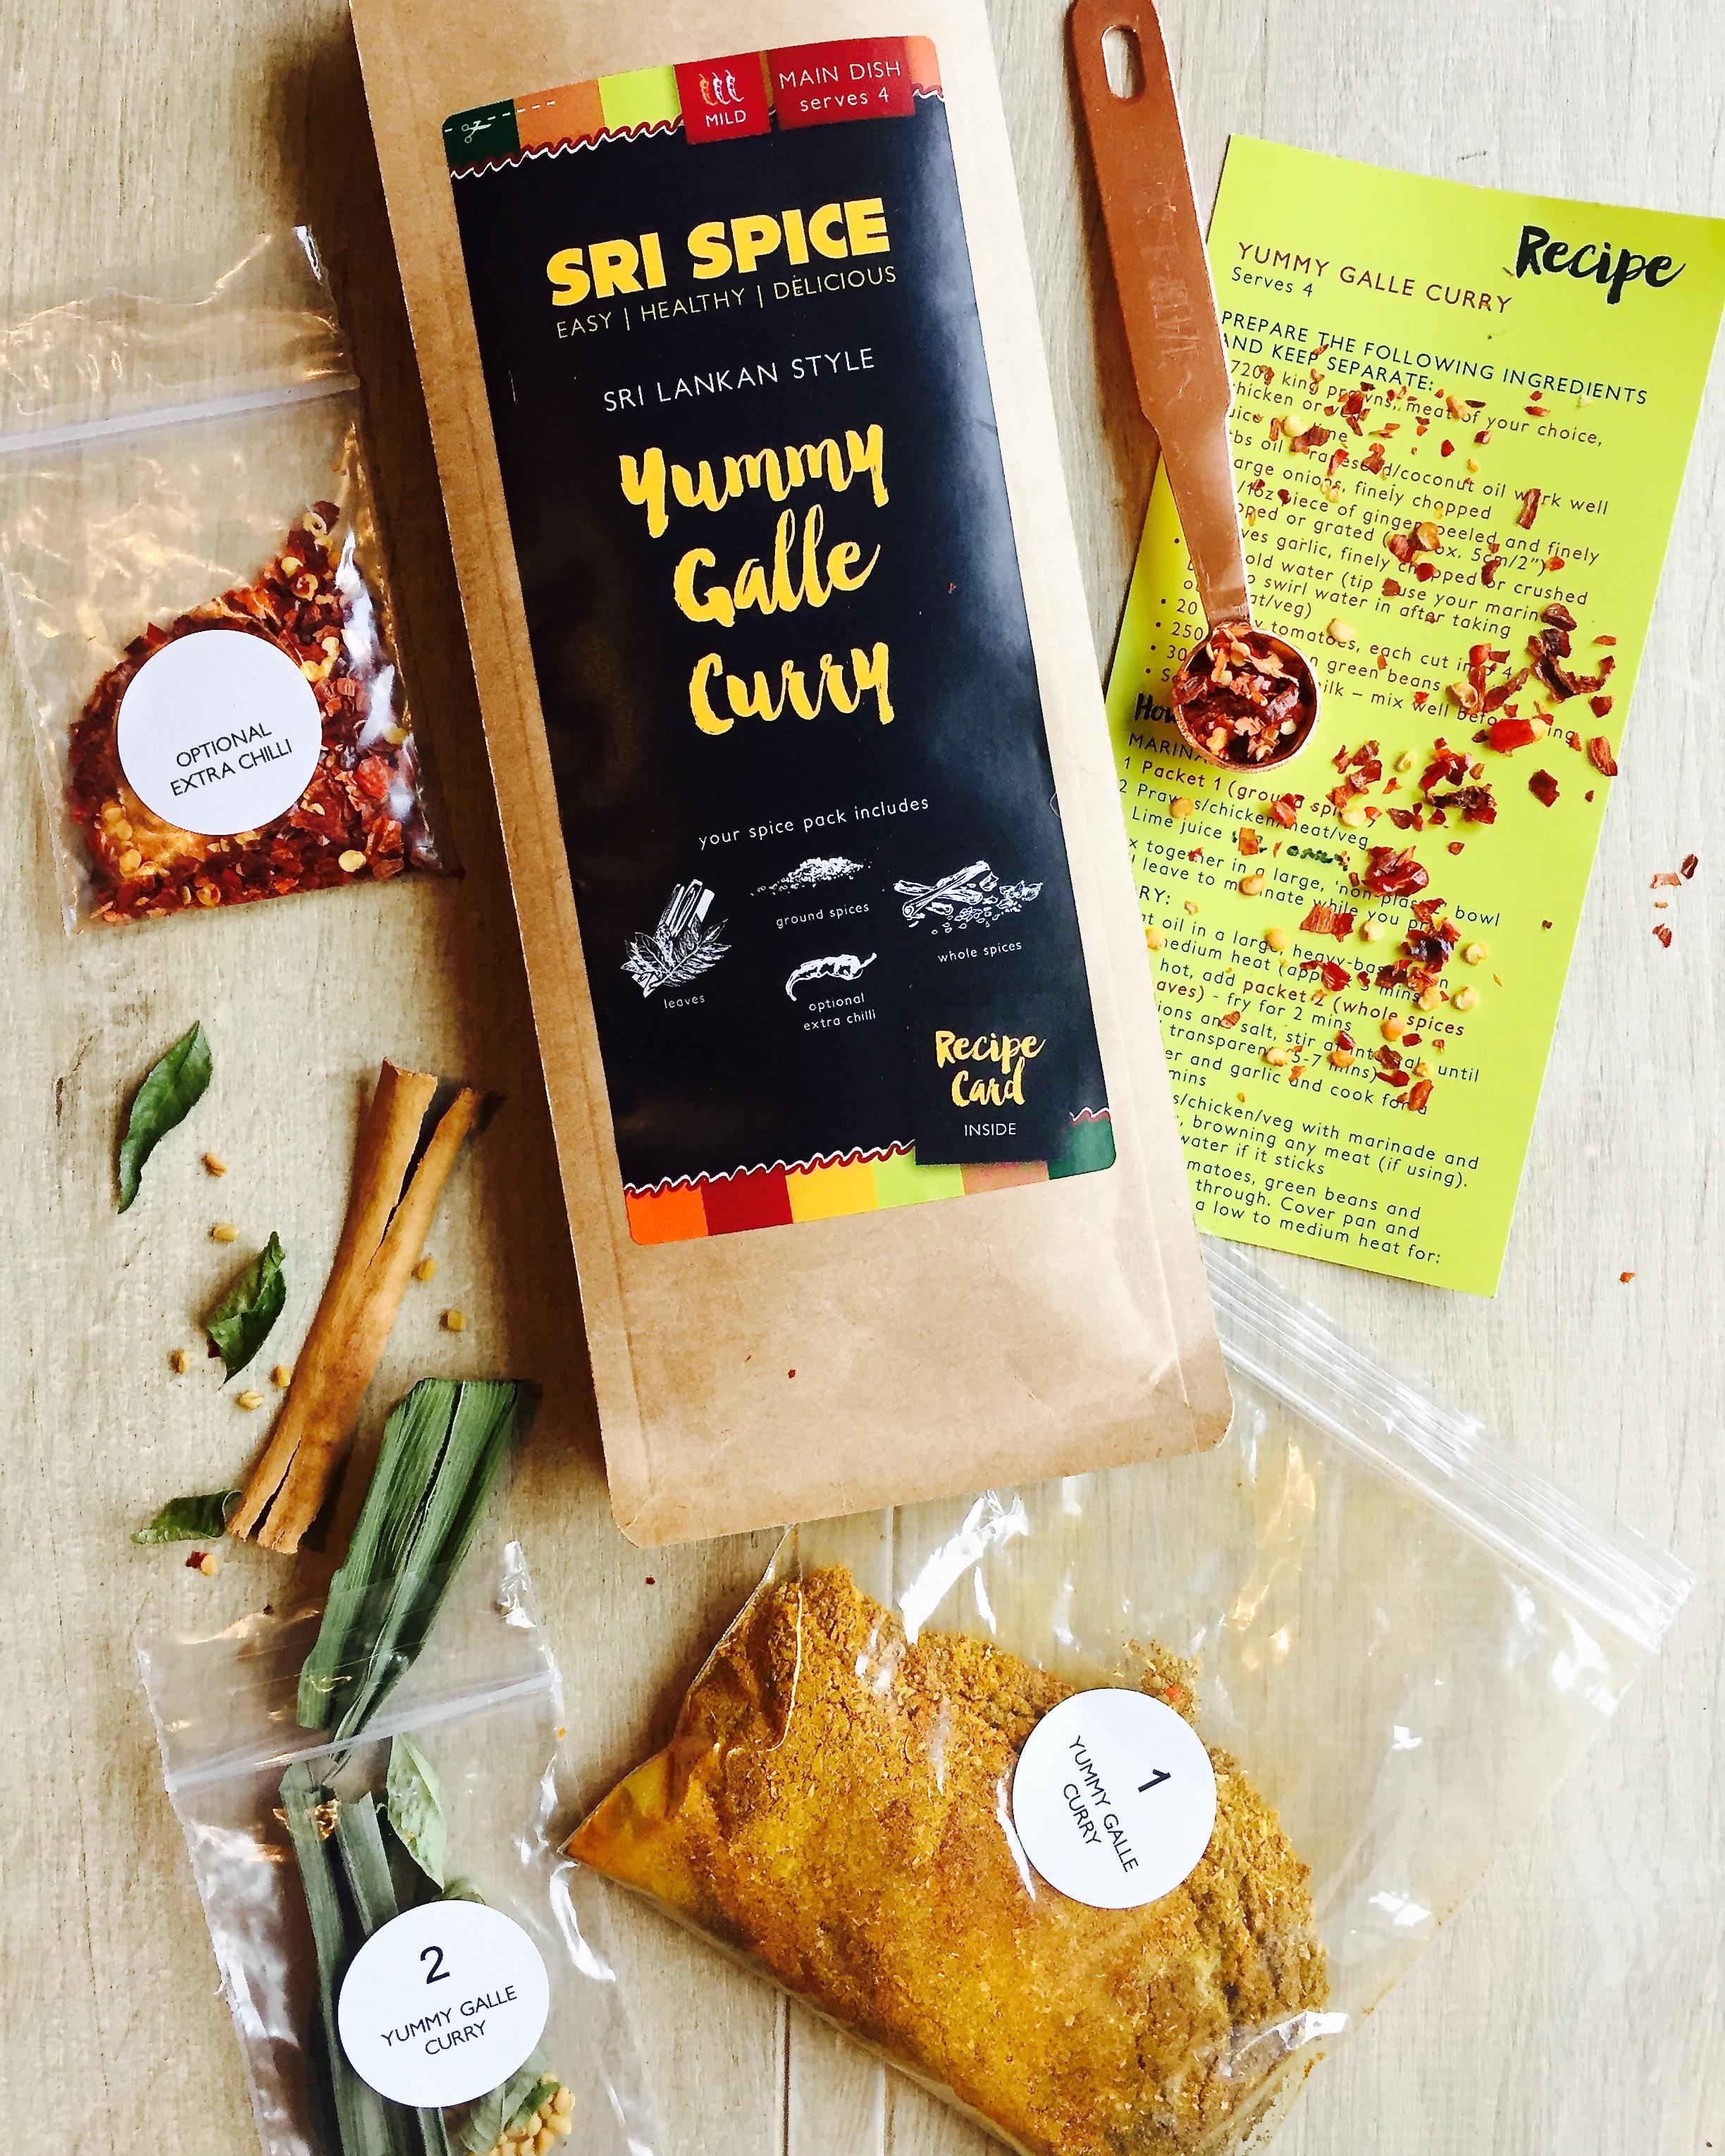 Yummy Galle Curry kit recipe card and spices